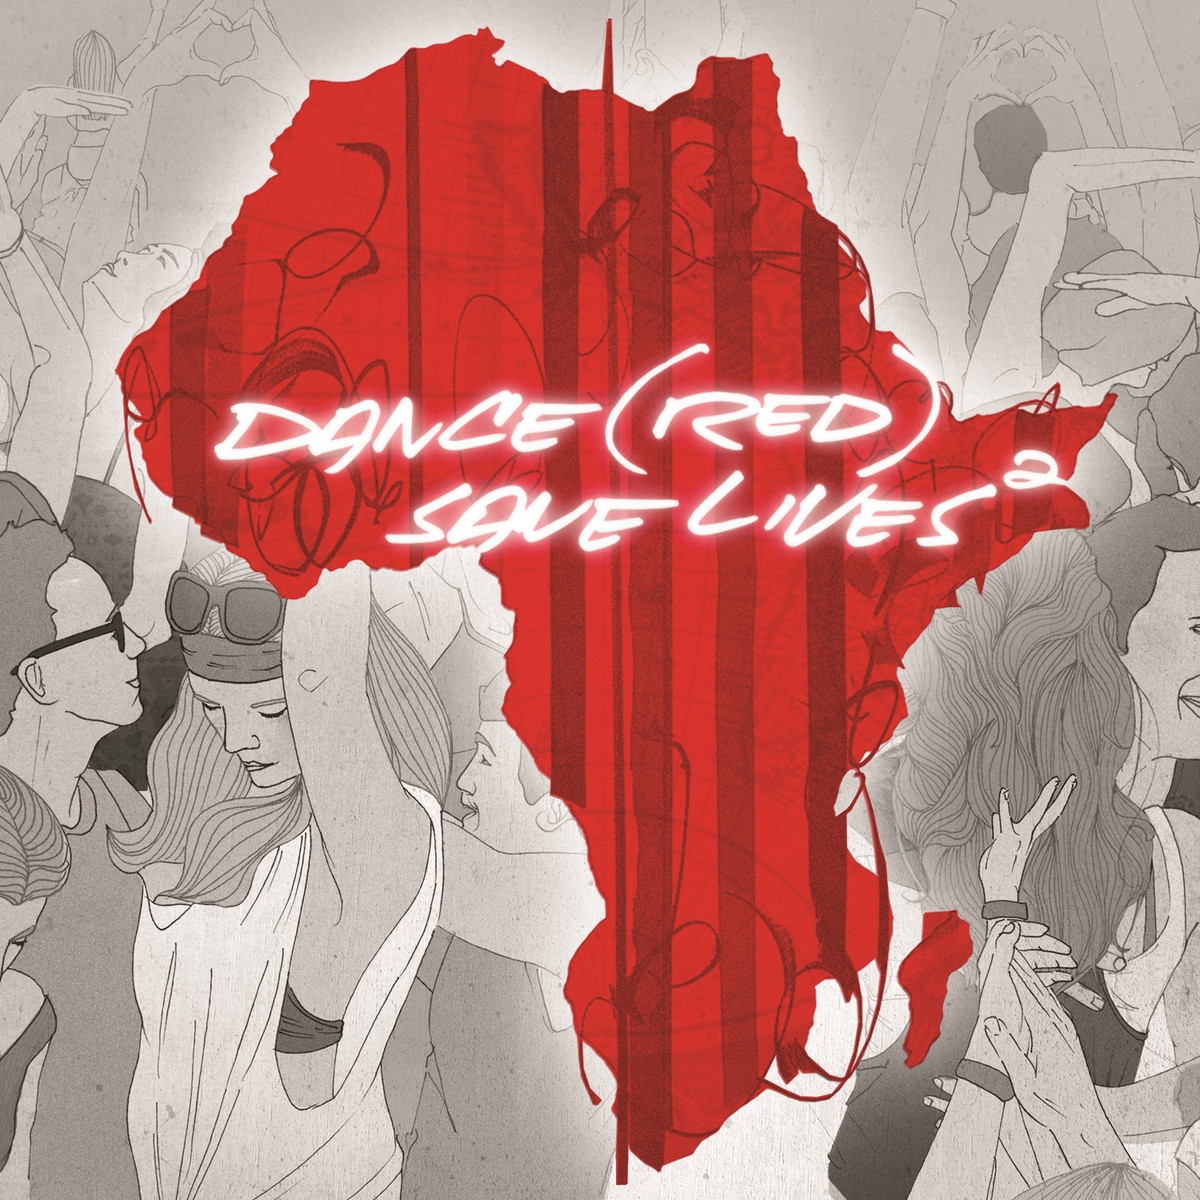 Dance (RED) Save Lives, Vol. 2